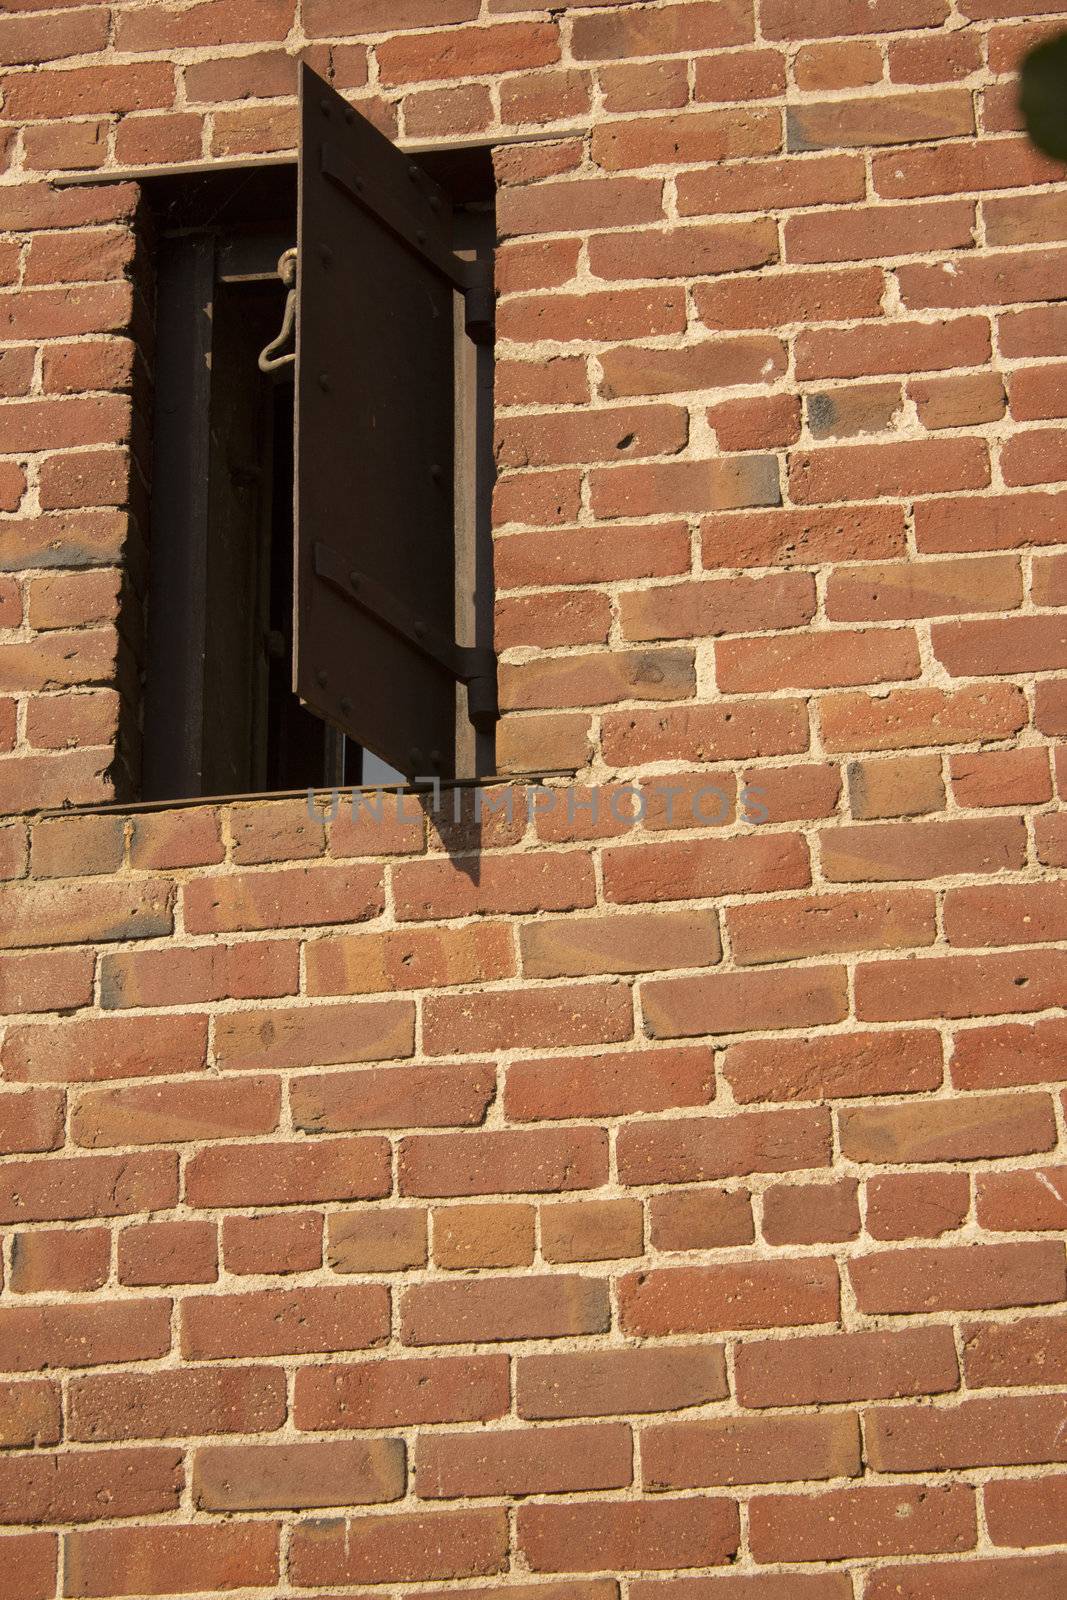 an old rusty window in a brick wall. the side of an old western jail.